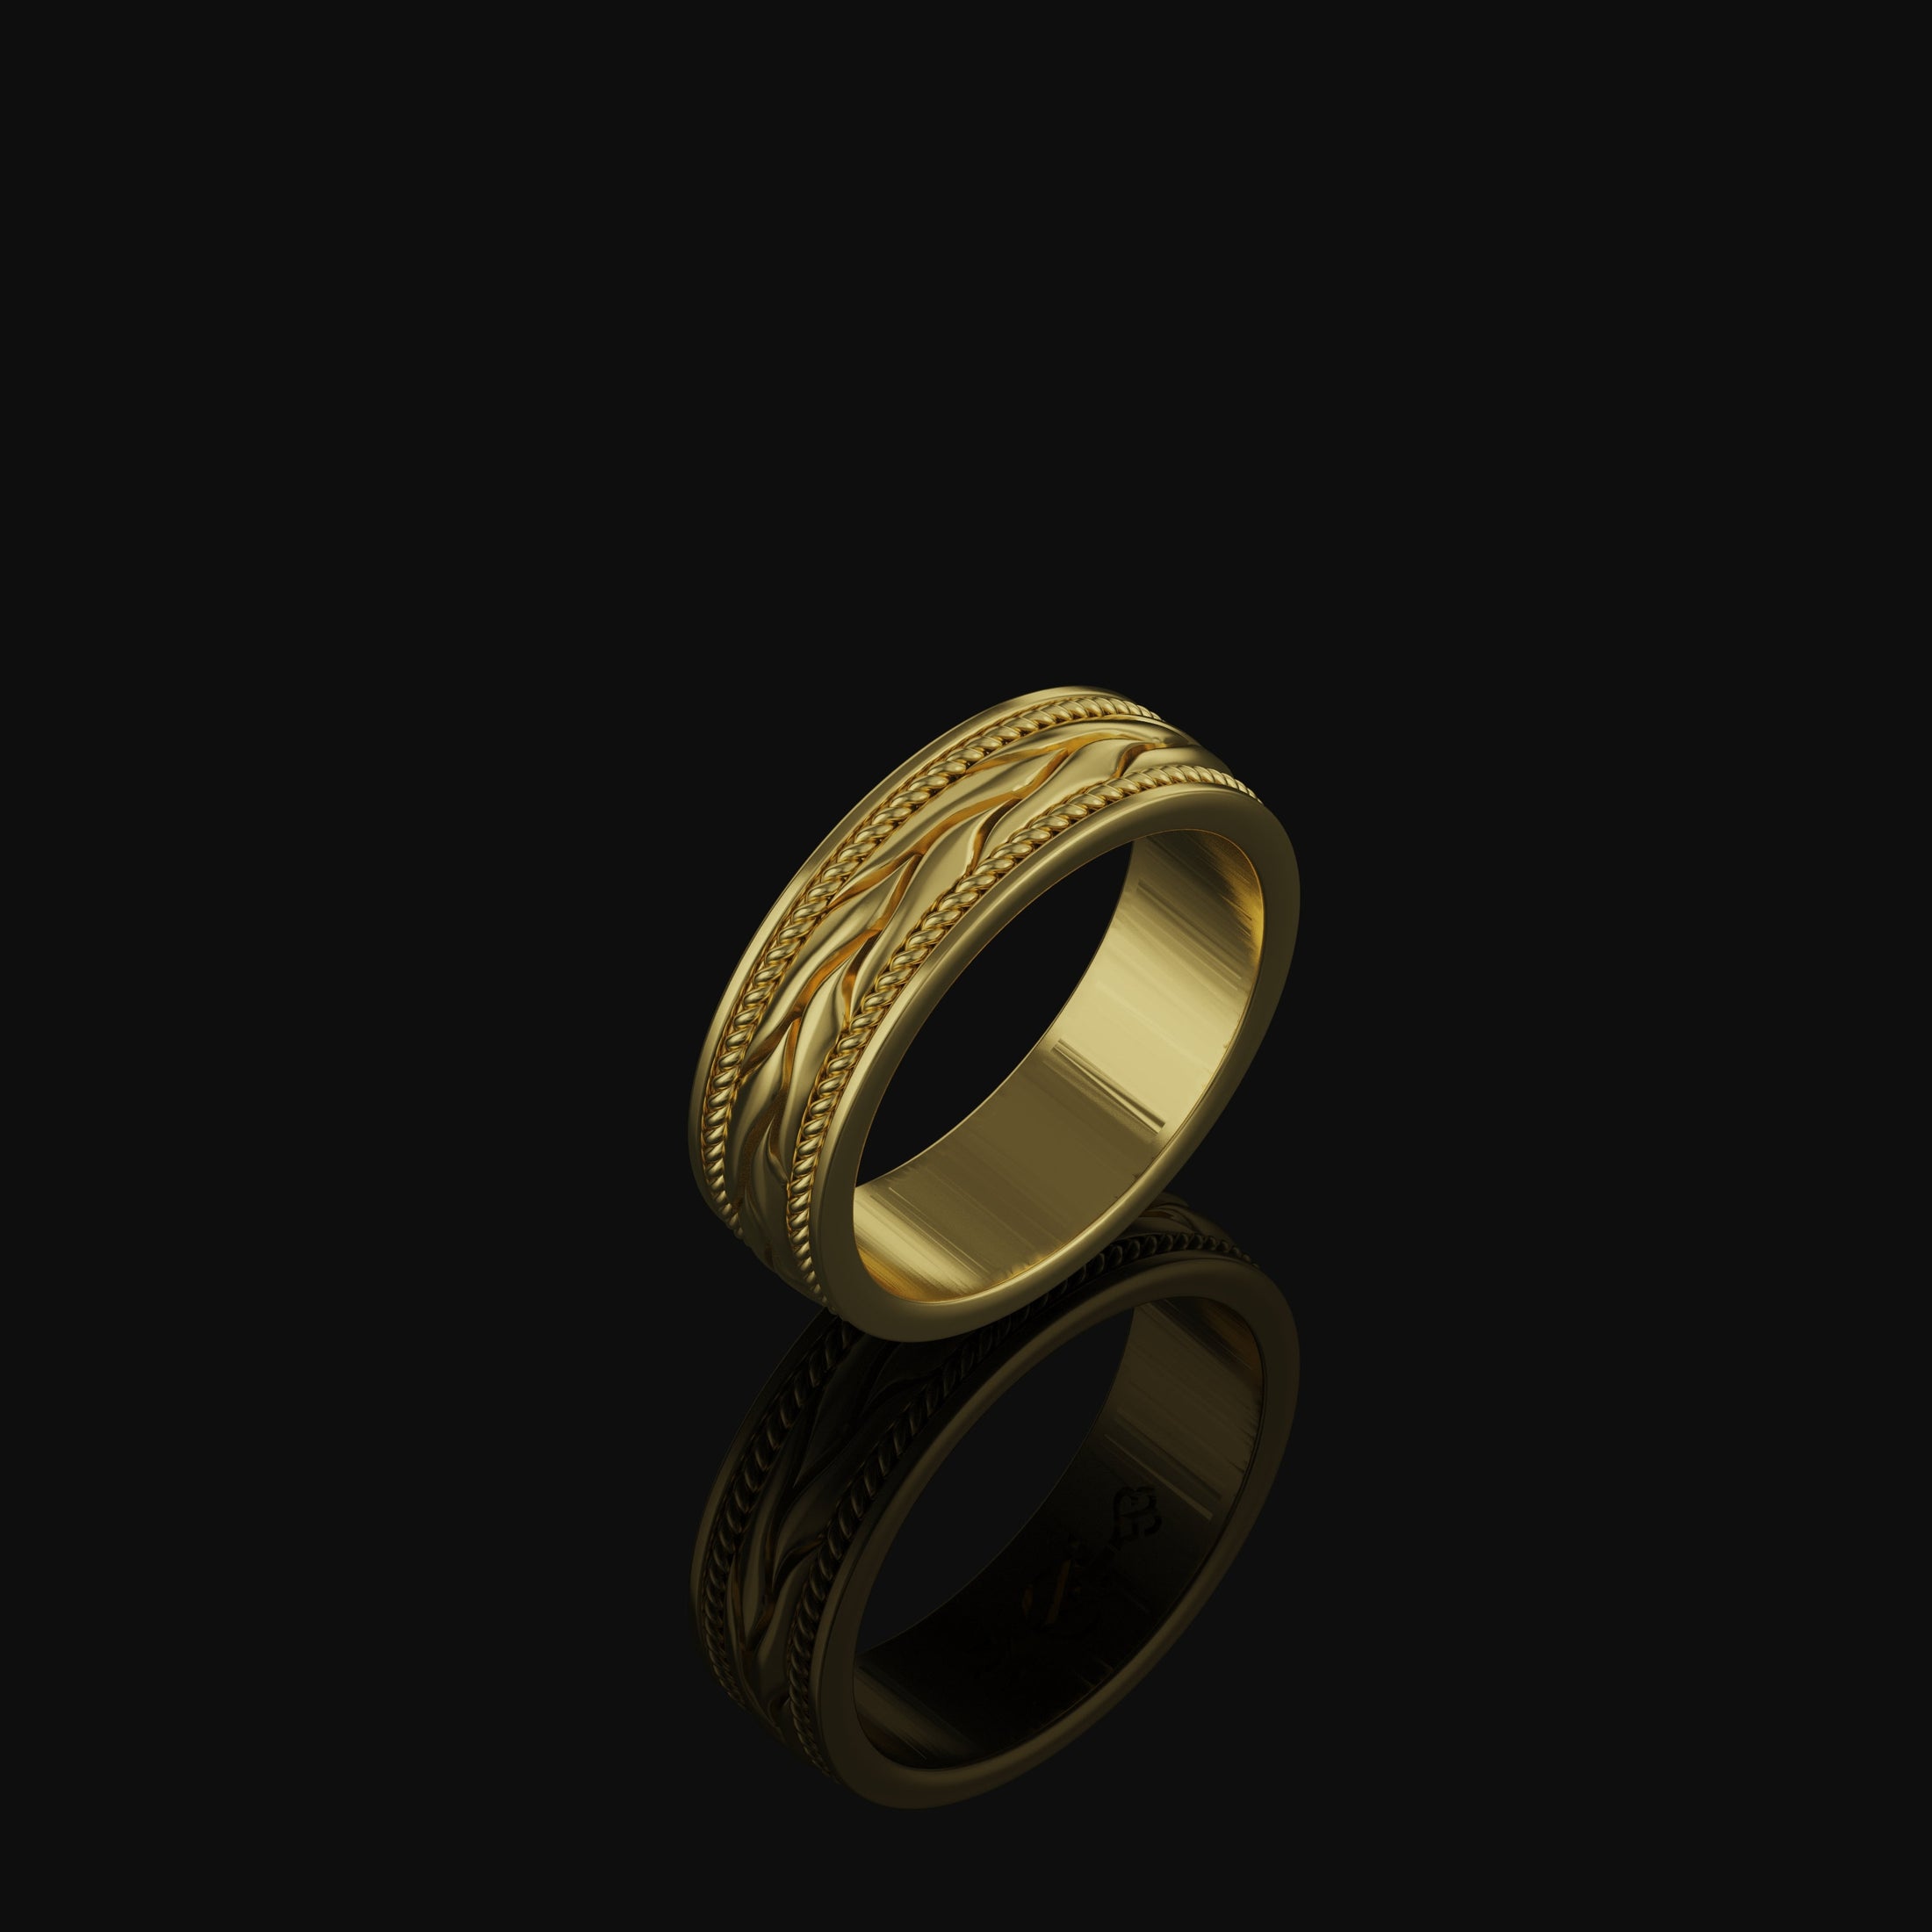 Braided Wheat Band - Engravable Gold Finish